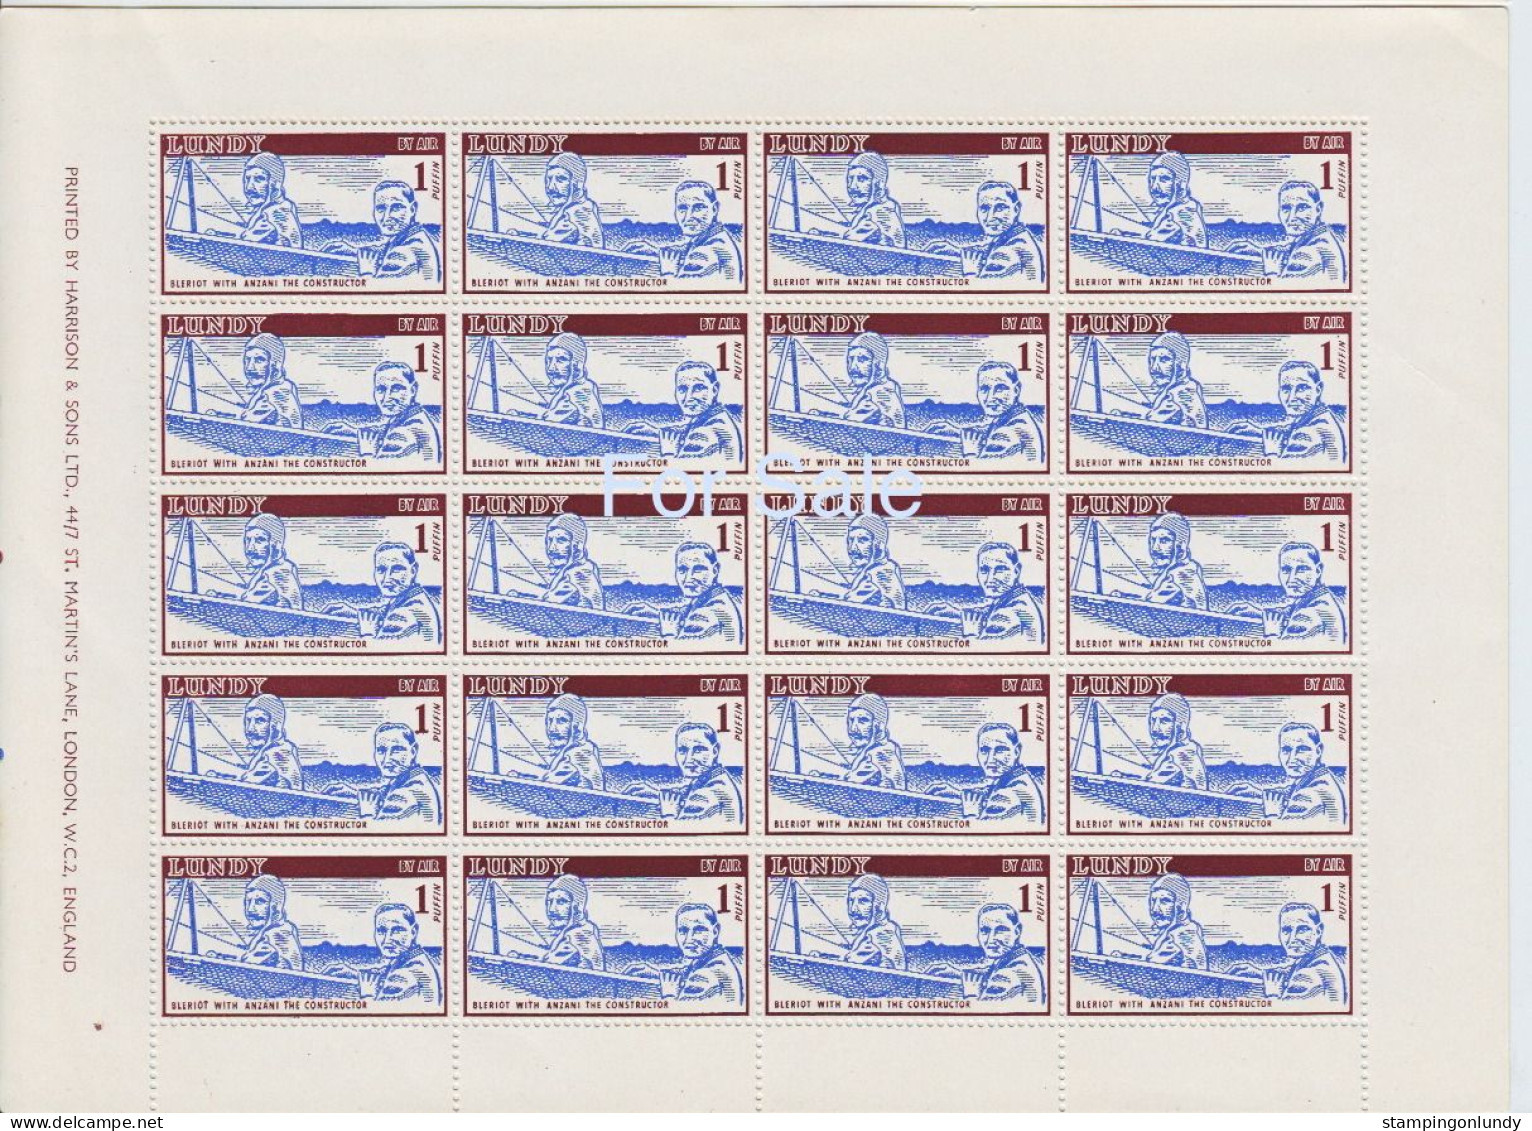 #02 Great Britain Lundy Island Puffin Stamp 1954 Jubilee Undated Airs Full Sheet 1p Bi-Plane Price Slashed! - Local Issues